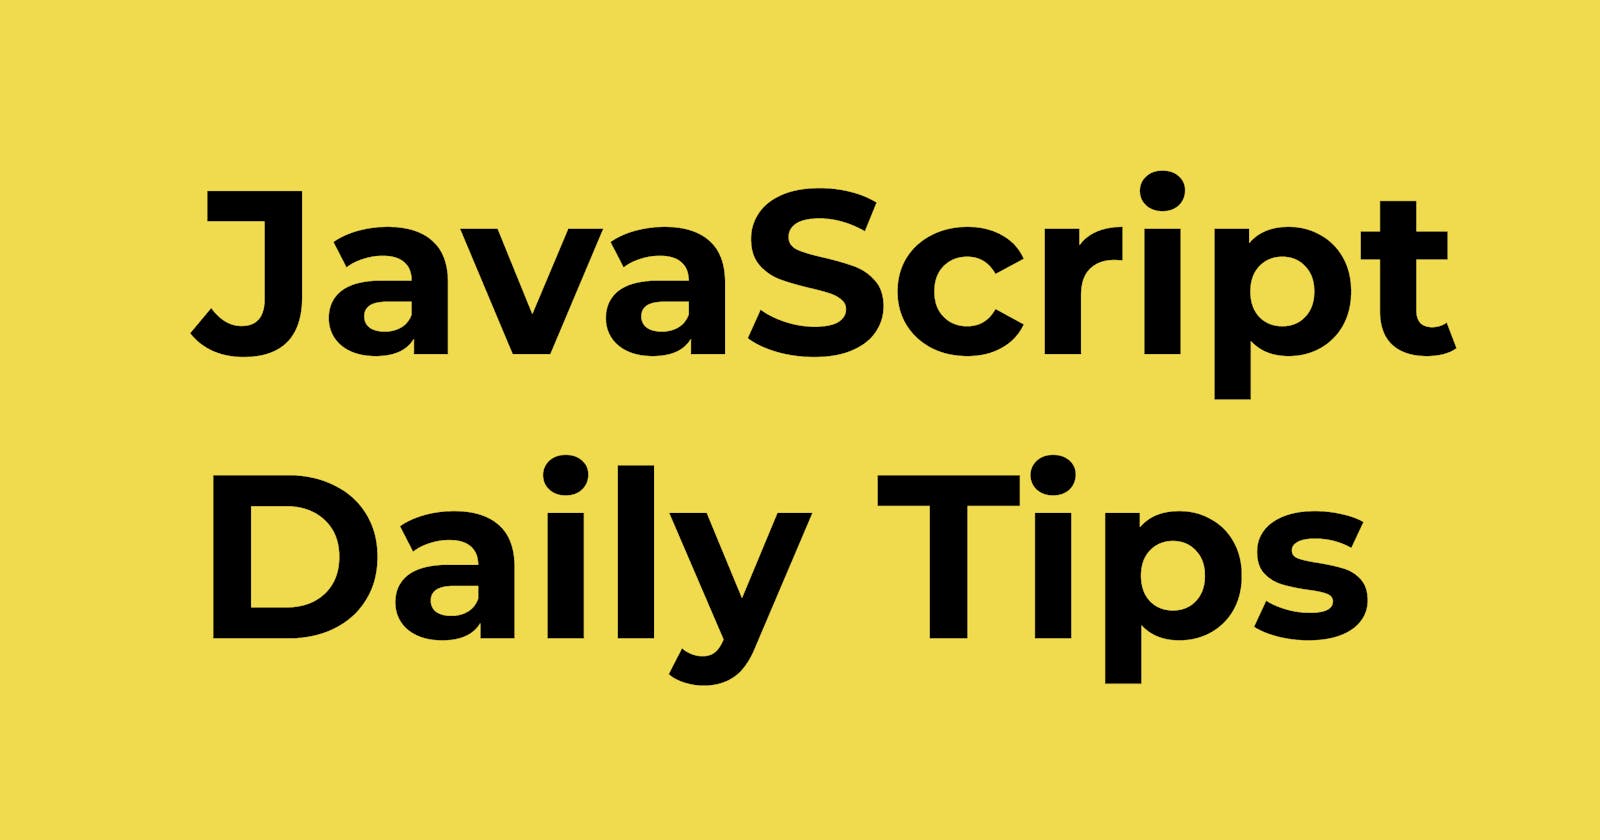 Clone an array without reference - JavaScript Basics Tips #Day1